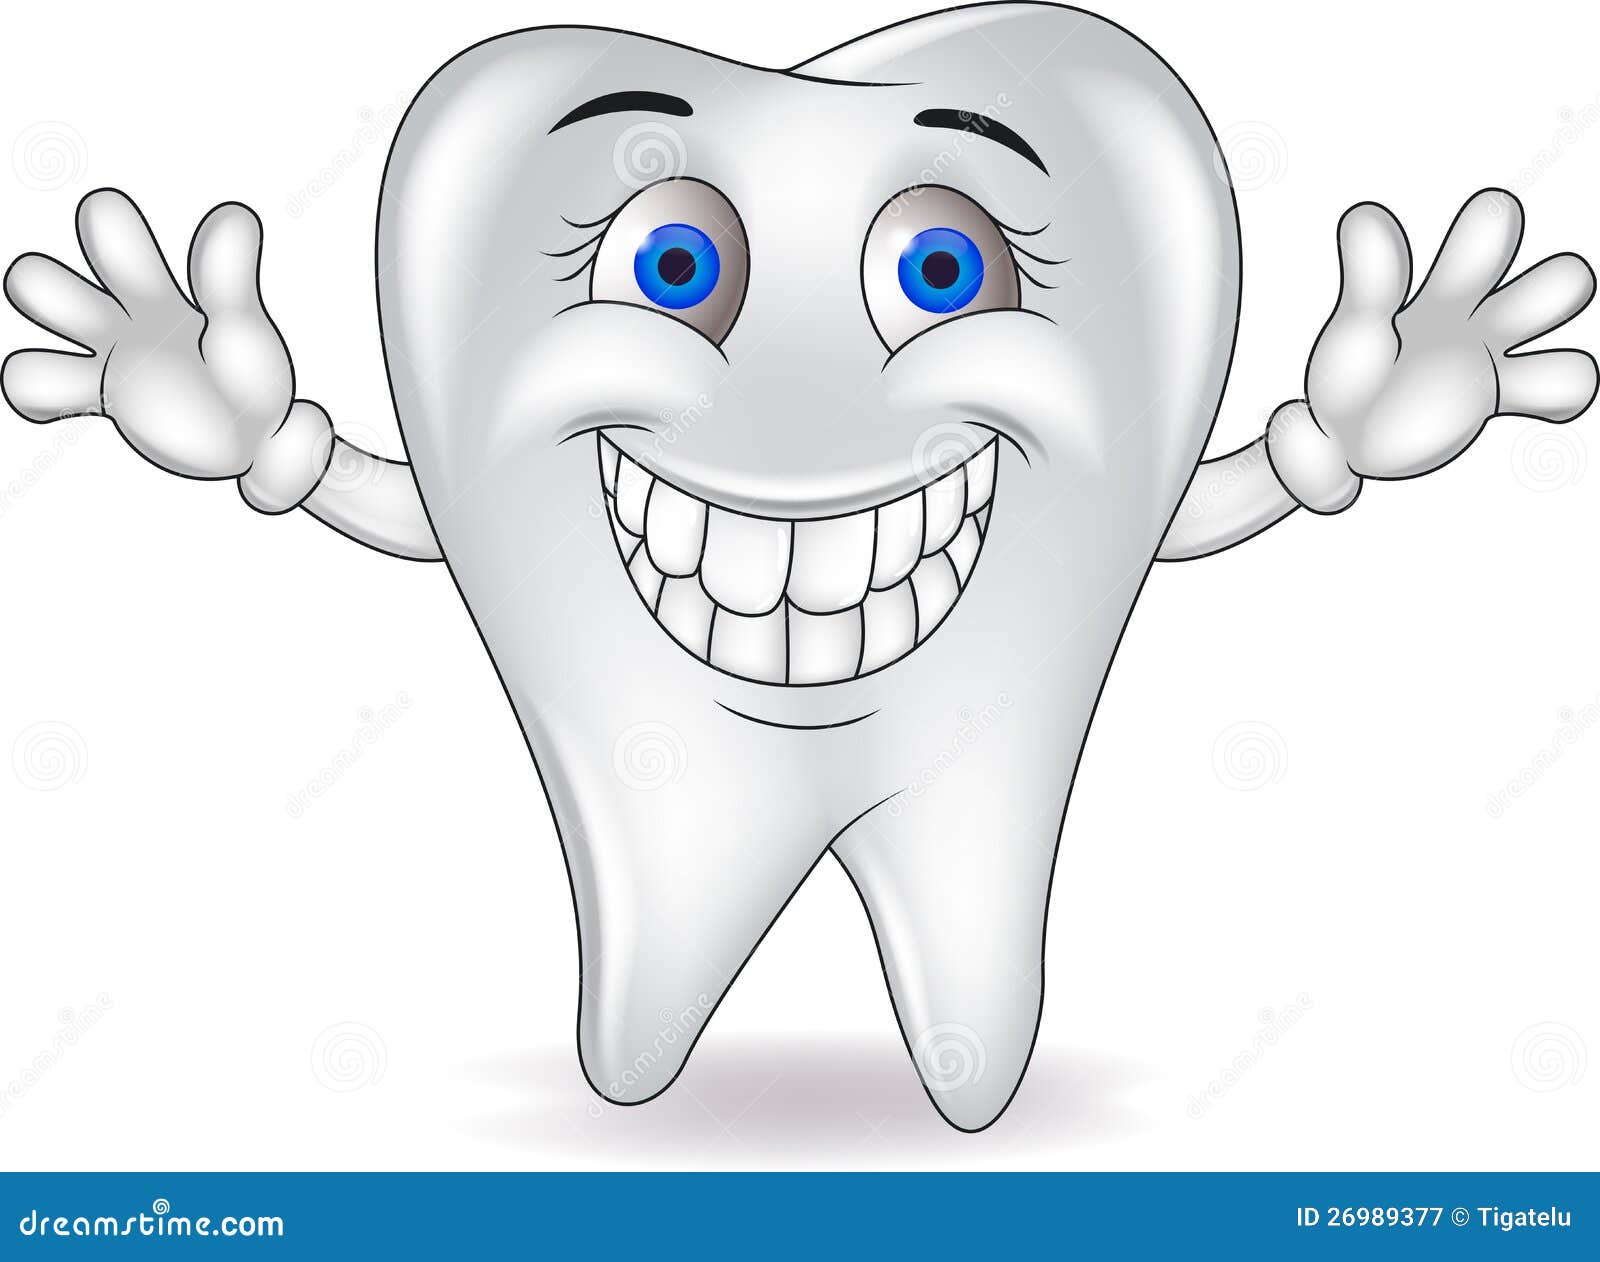 happy tooth clipart - photo #21